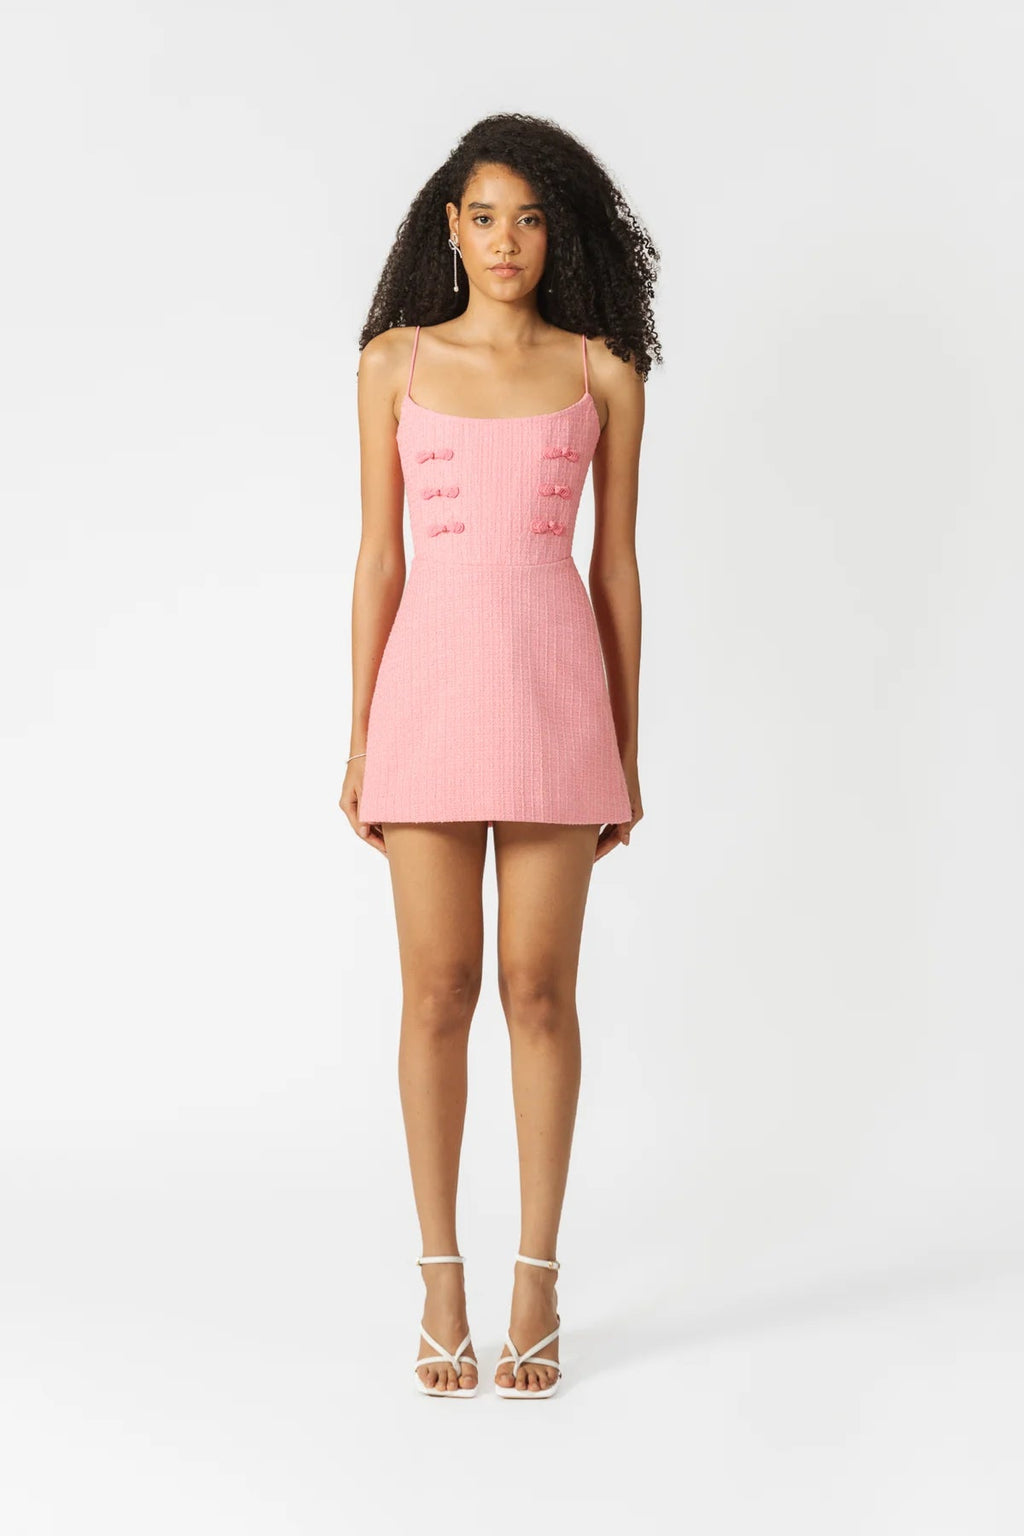 Andi Tweed Mini Dress in Pink - Ché by Chelsey